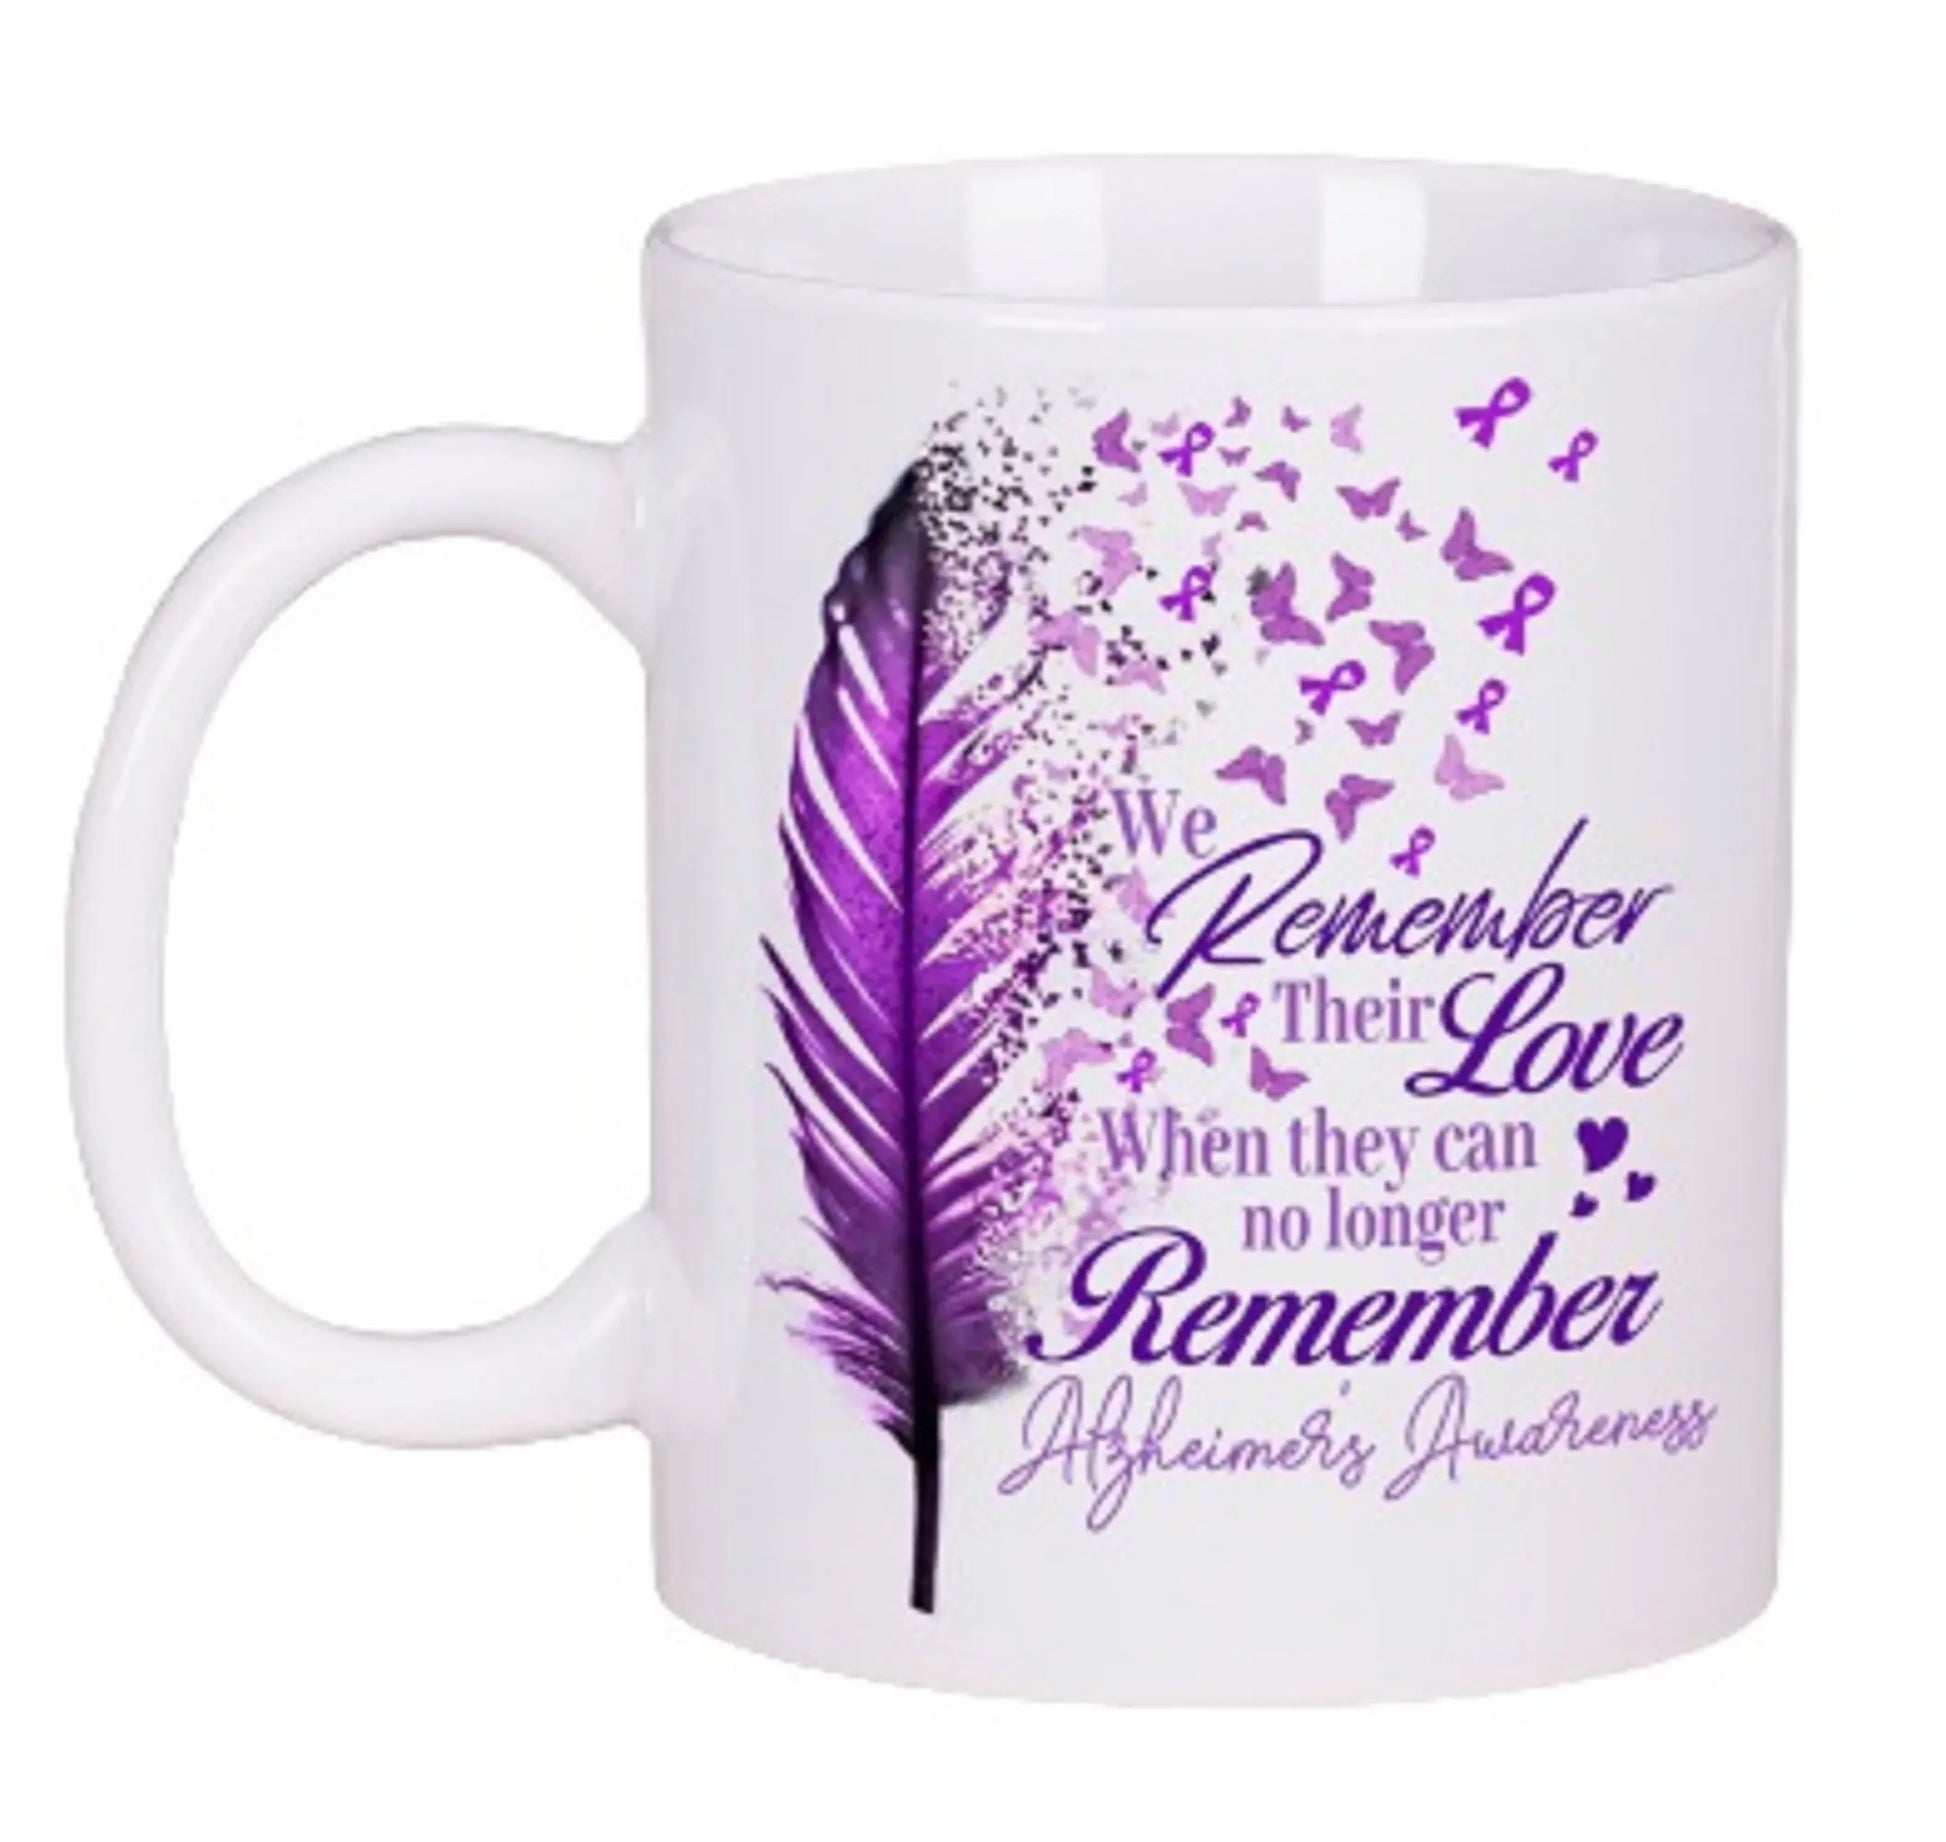  Remember Their Love Alzheimer's Awareness Mug by Free Spirit Accessories sold by Free Spirit Accessories